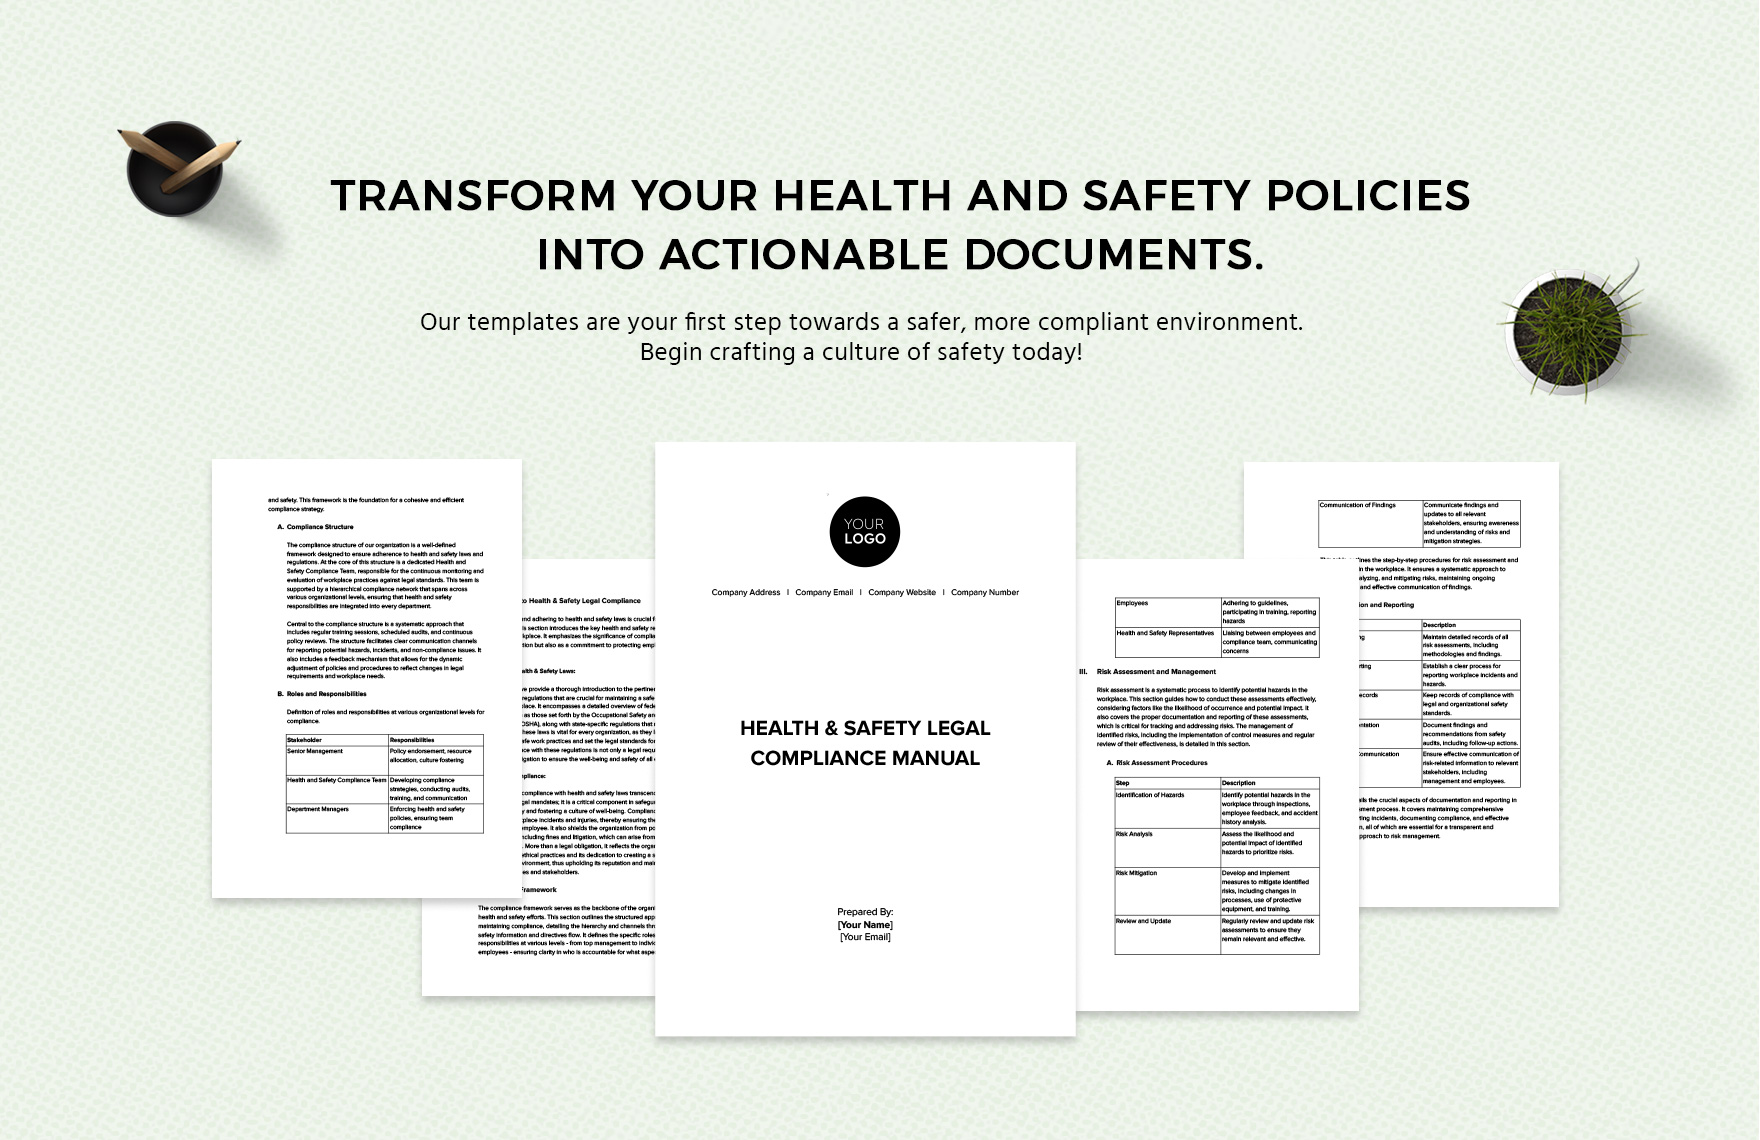 Health & Safety Legal Compliance Manual Template